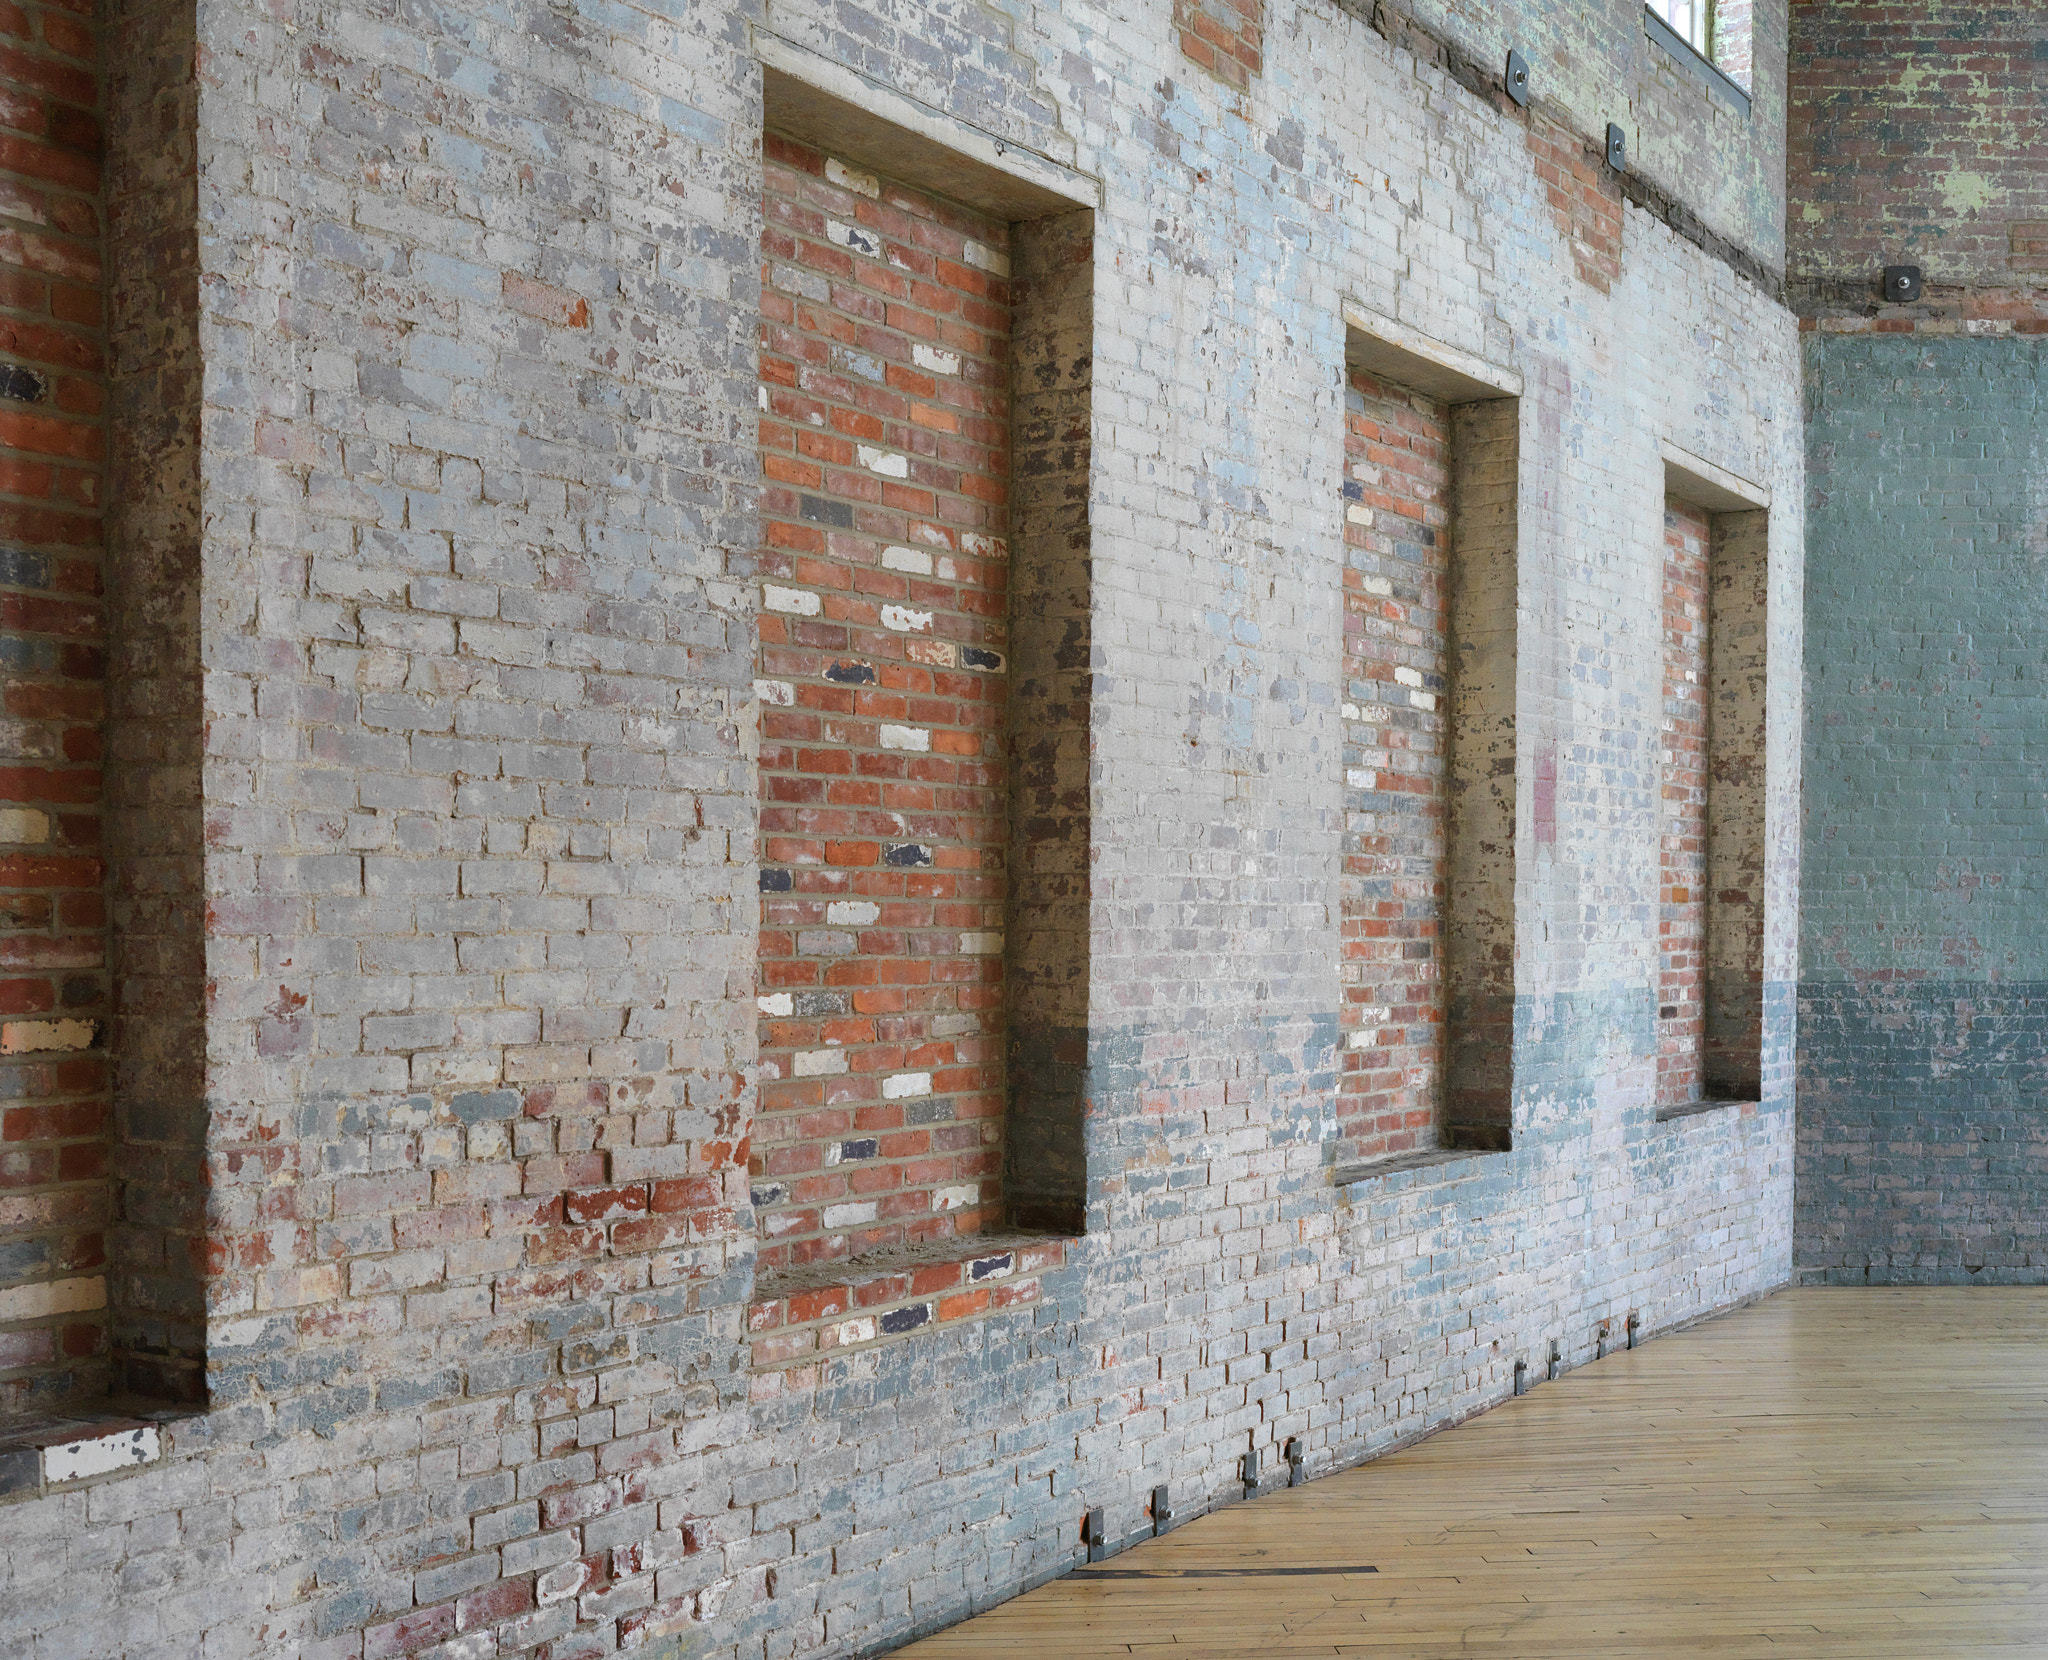 Hasselblad X1D-50c sample photo. Bricked up windows in former warehouse photography